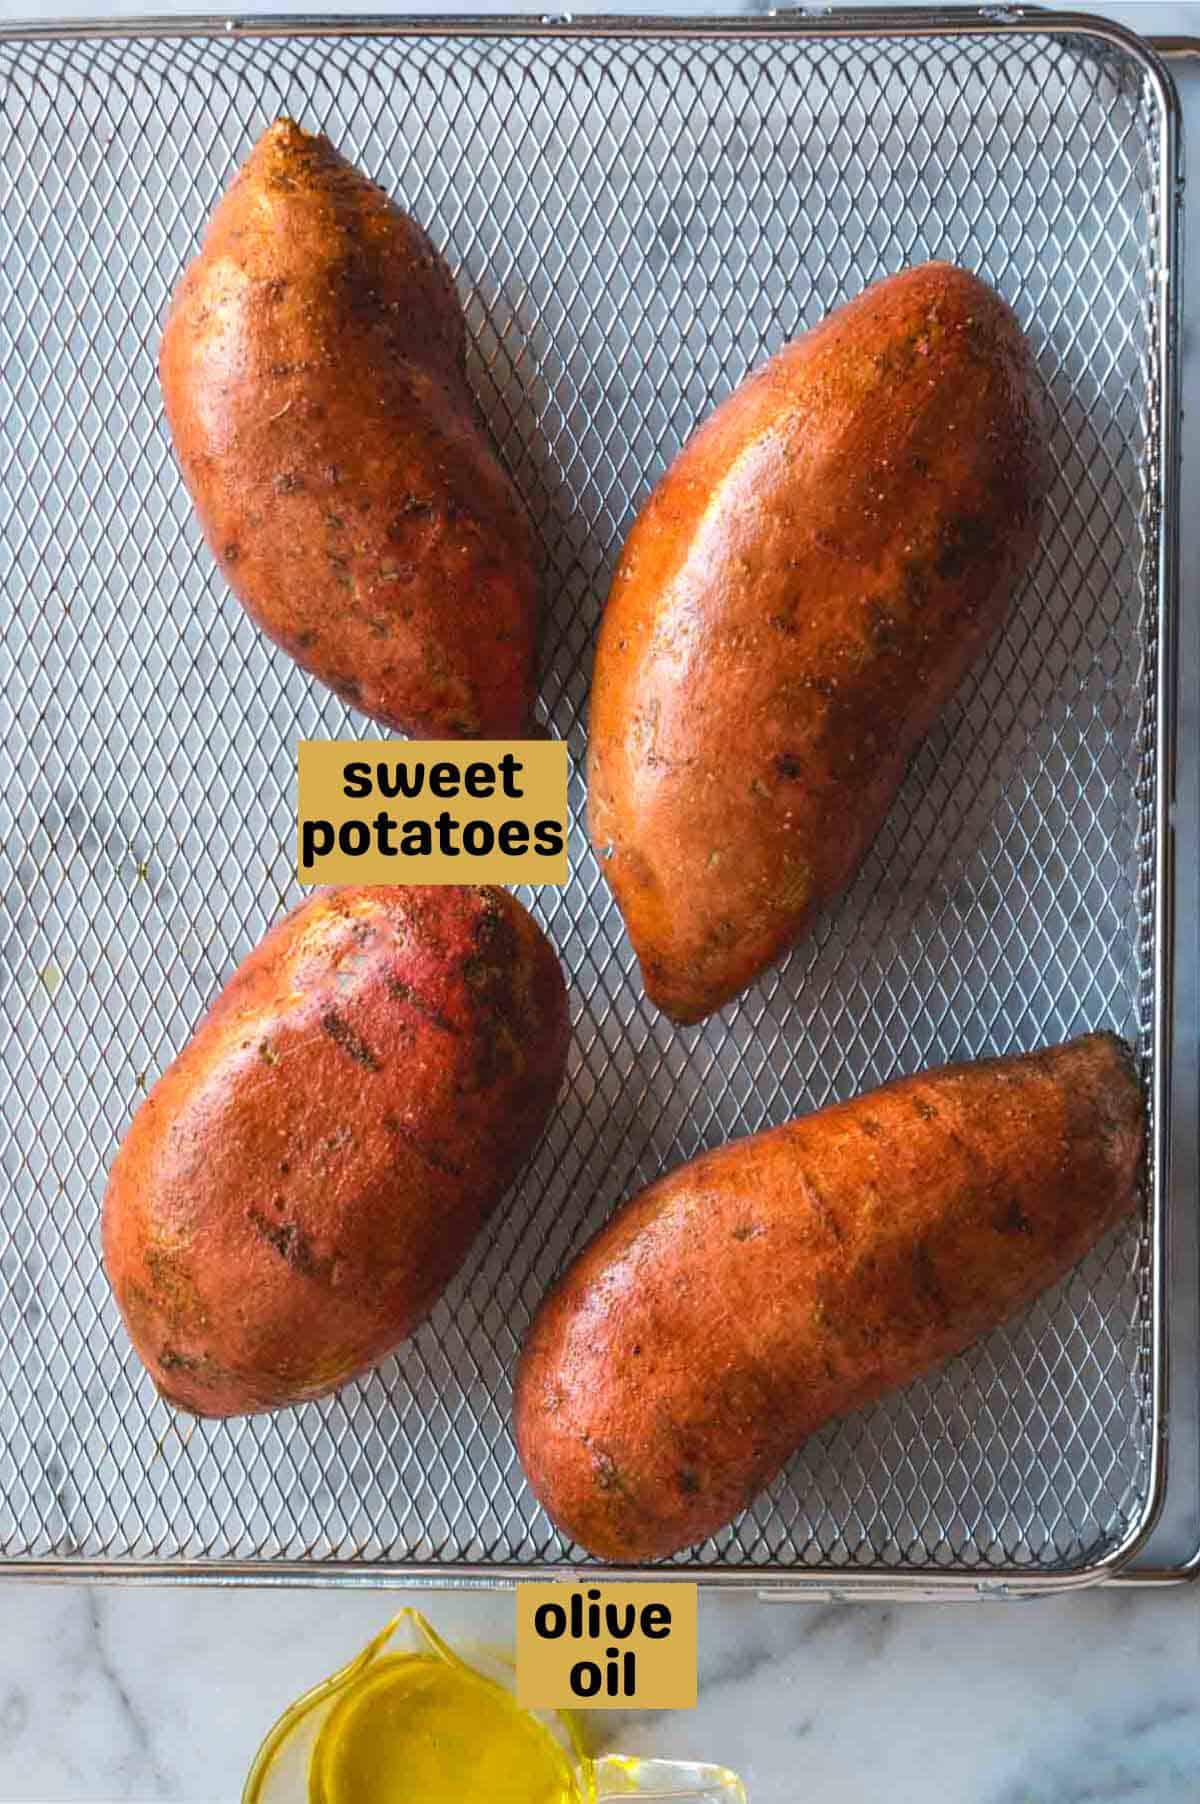 Four whole sweet potatoes on a wire mesh baking sheet next to a small glass cup with olive oil.